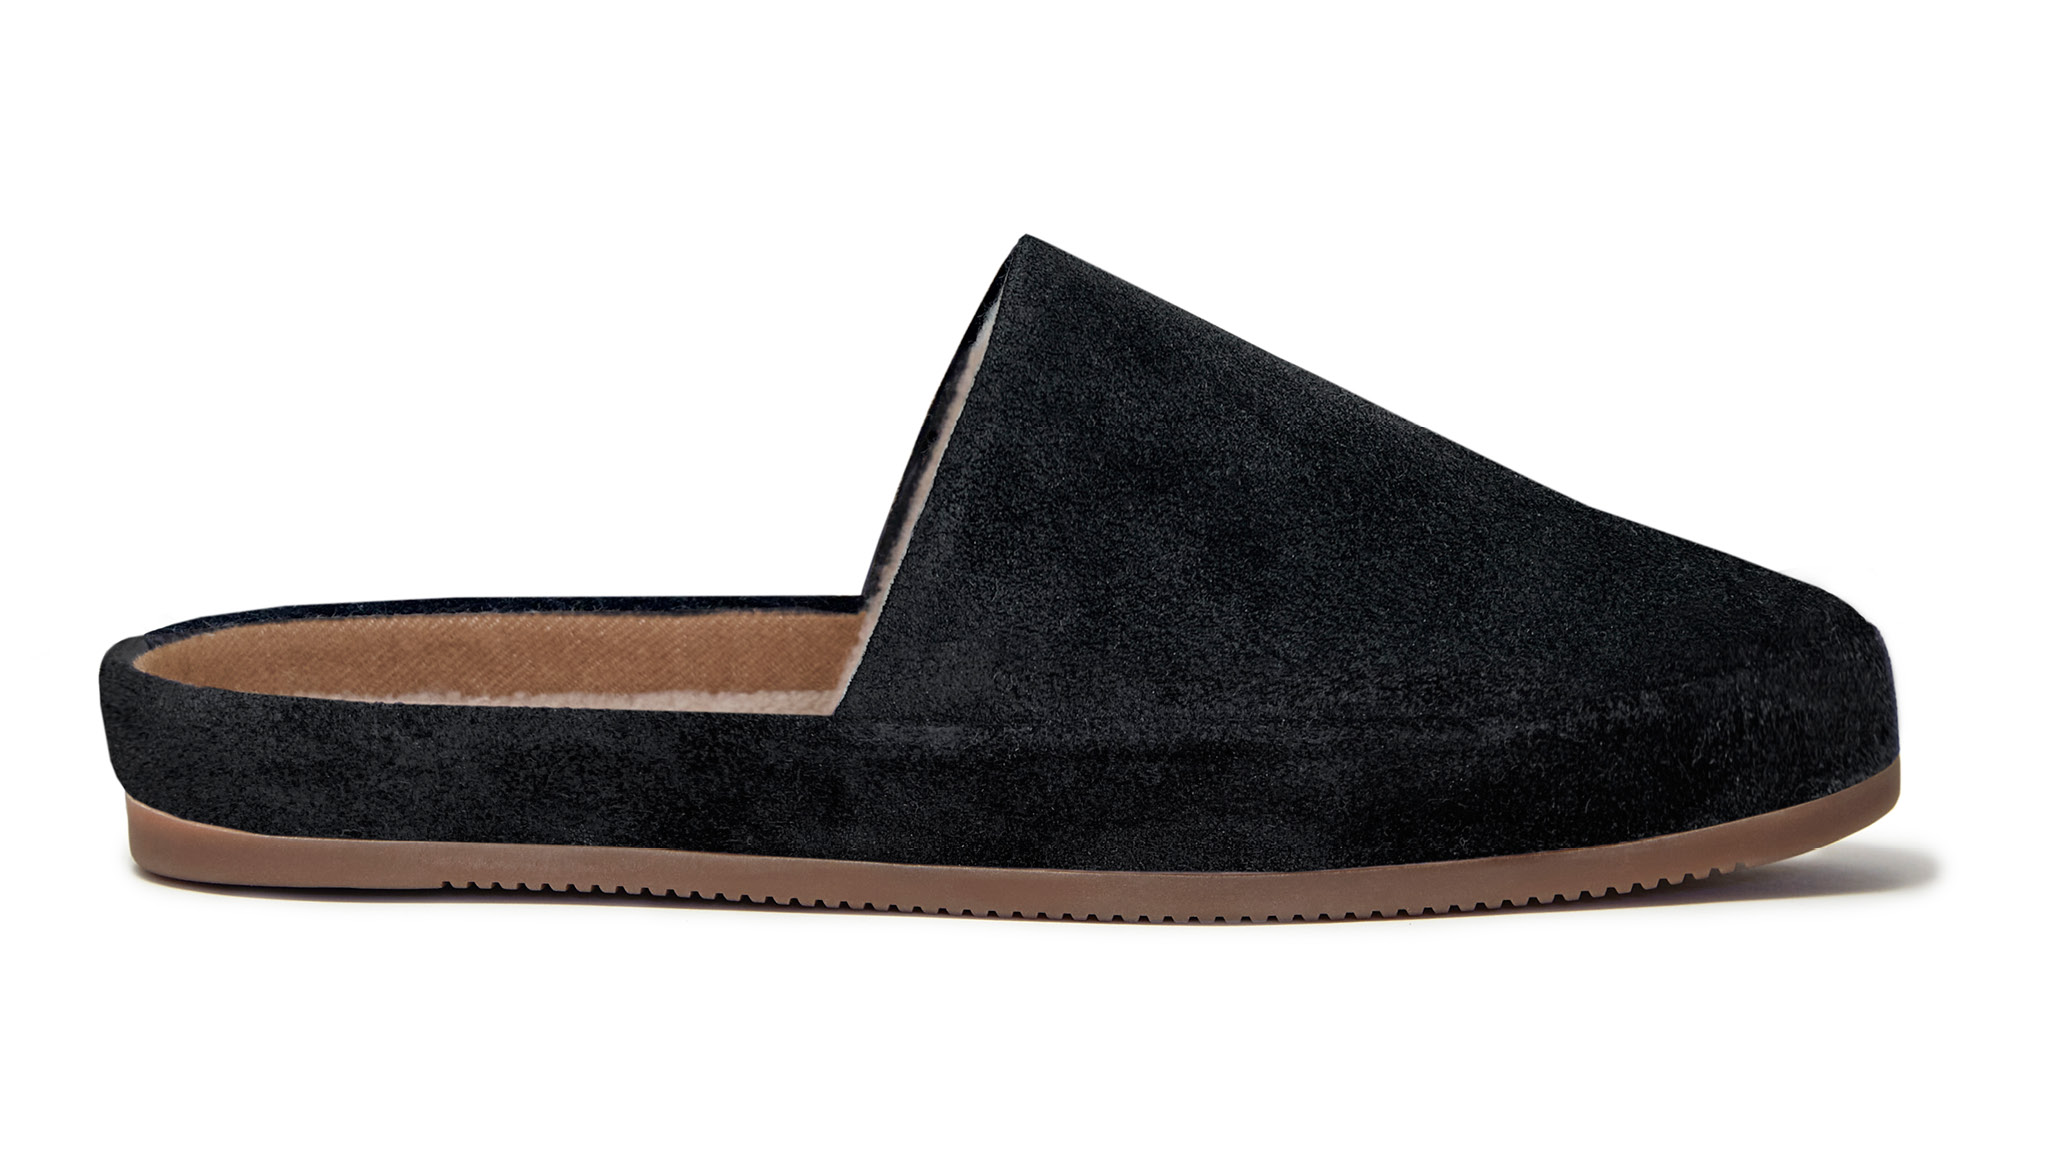 suede slippers